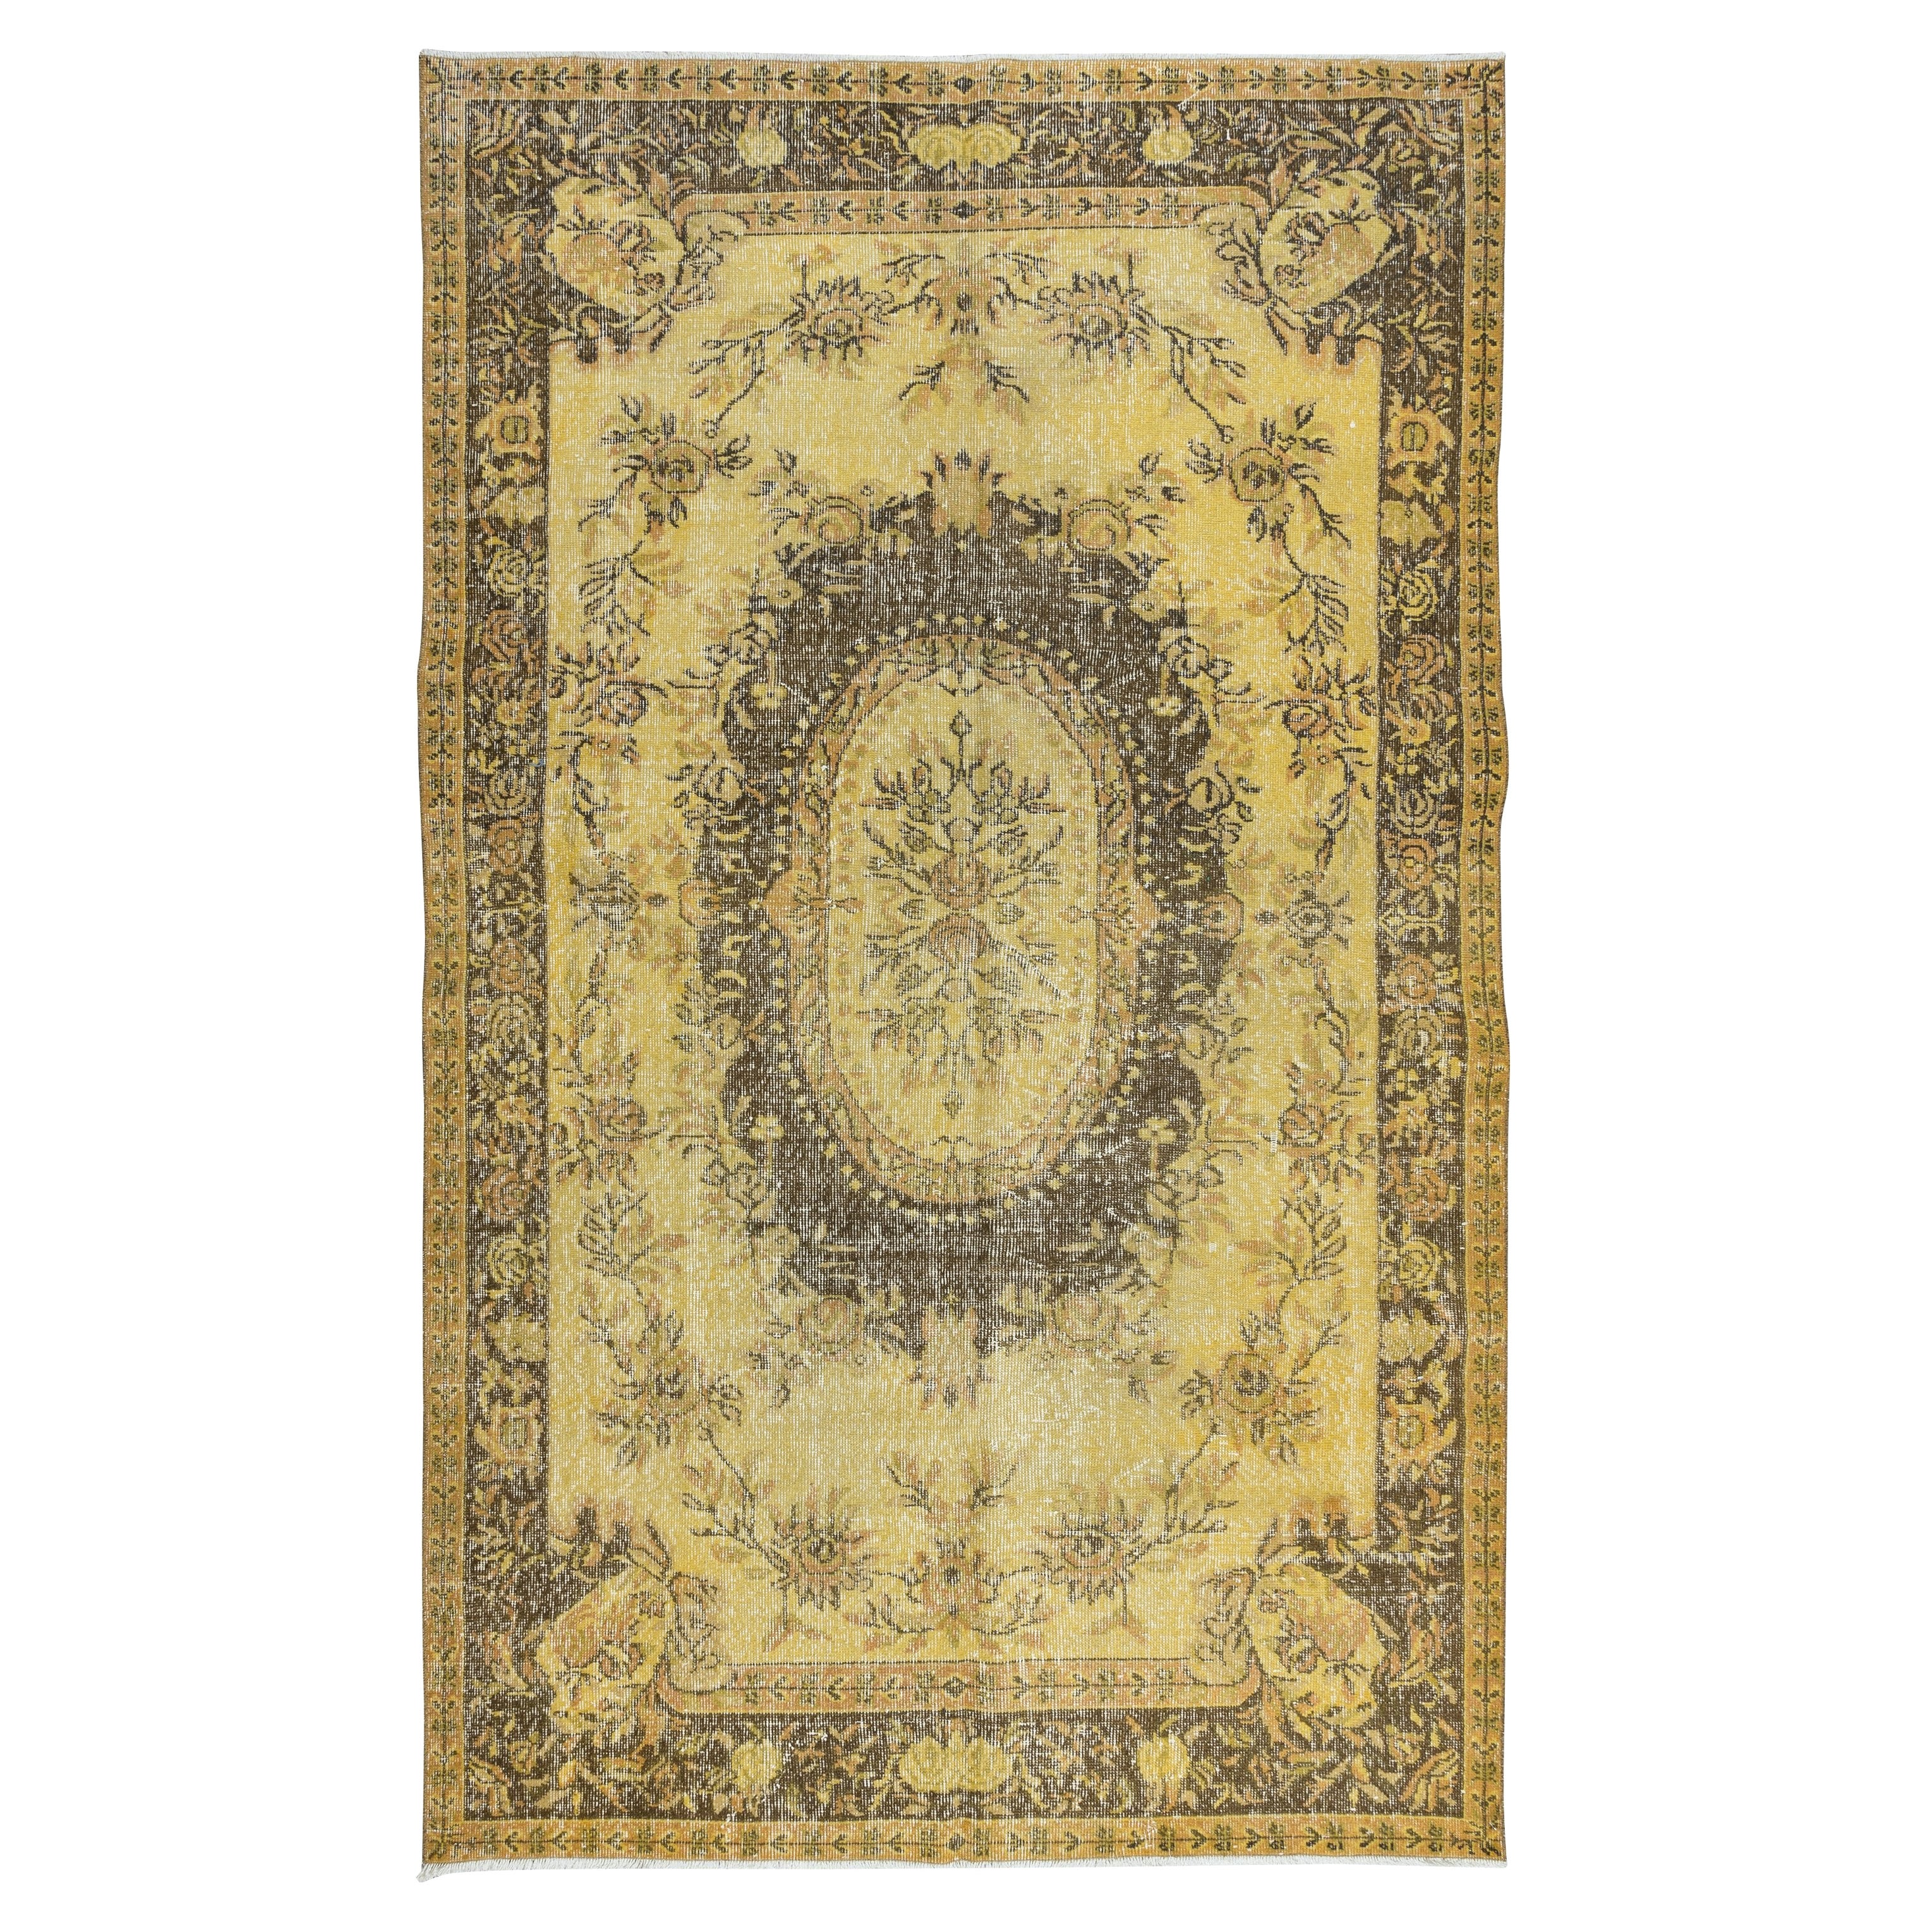 5.8x9.6 Ft Classic Aubusson Inspired Handmade Turkish Rug in Soft Yellow & Brown For Sale